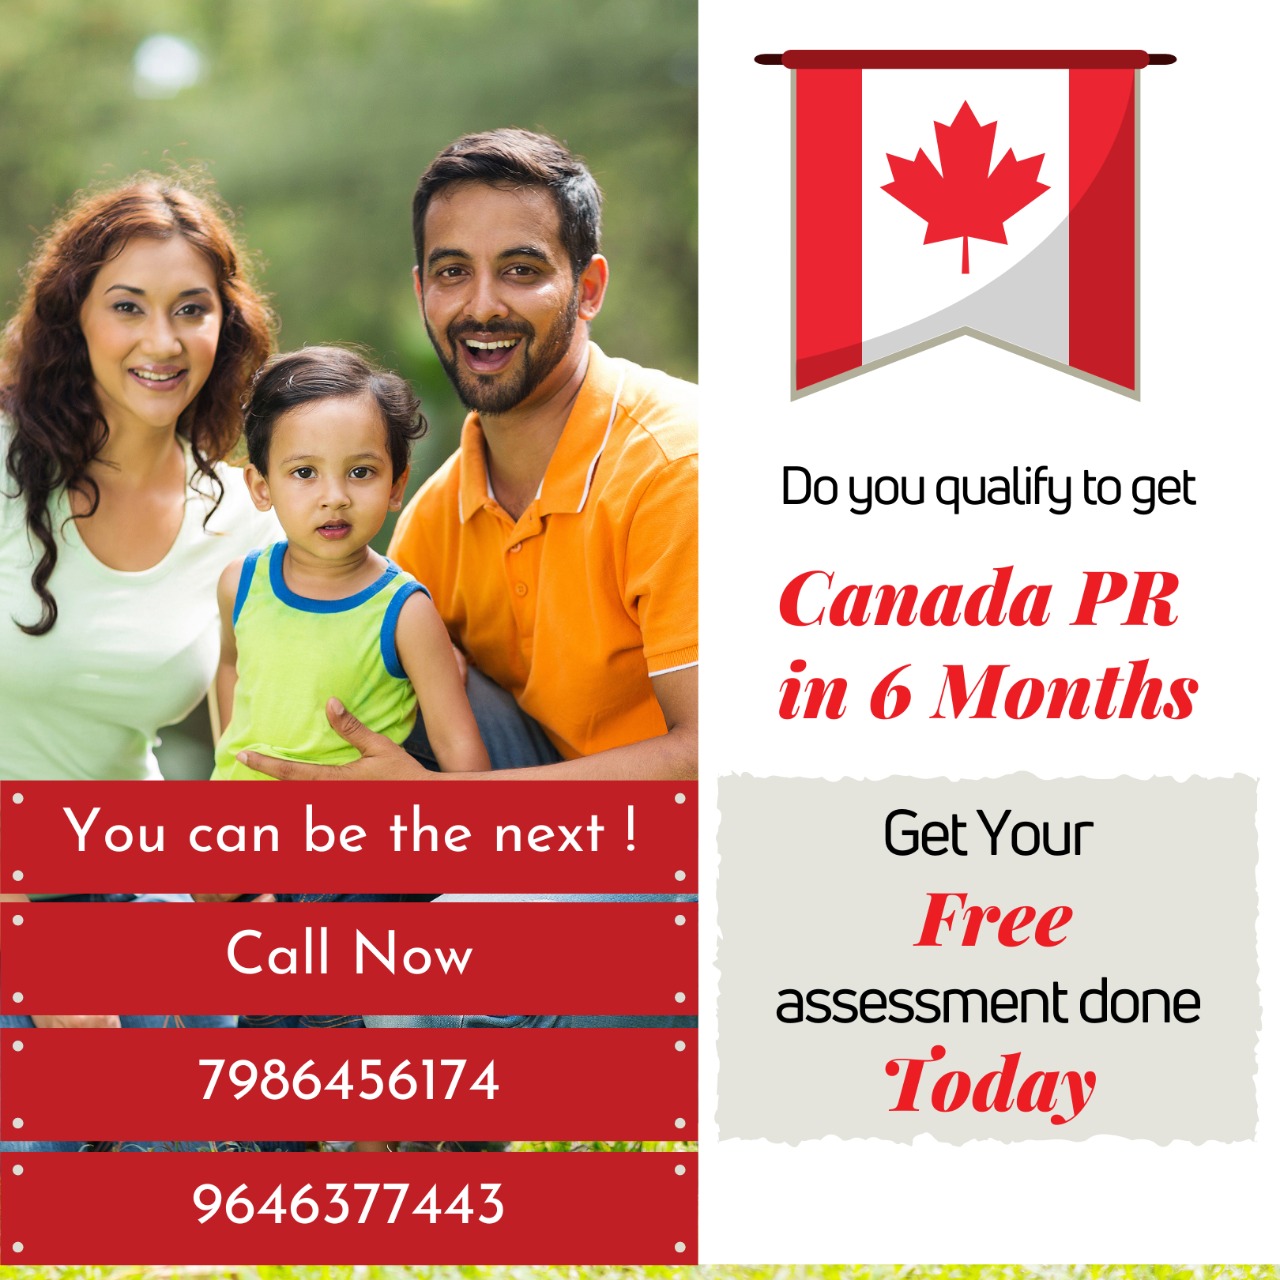 Is it the right time to start your Canadian immigration process - Canada PR Consultants in Panchkula  | Transformers Immigration and Education Consultants |  top immigration consultant for Canada in Panchkula, best  immigration consultant for Canada in Panchkula, immigration agents for Canada in Panchkula, - GL90297